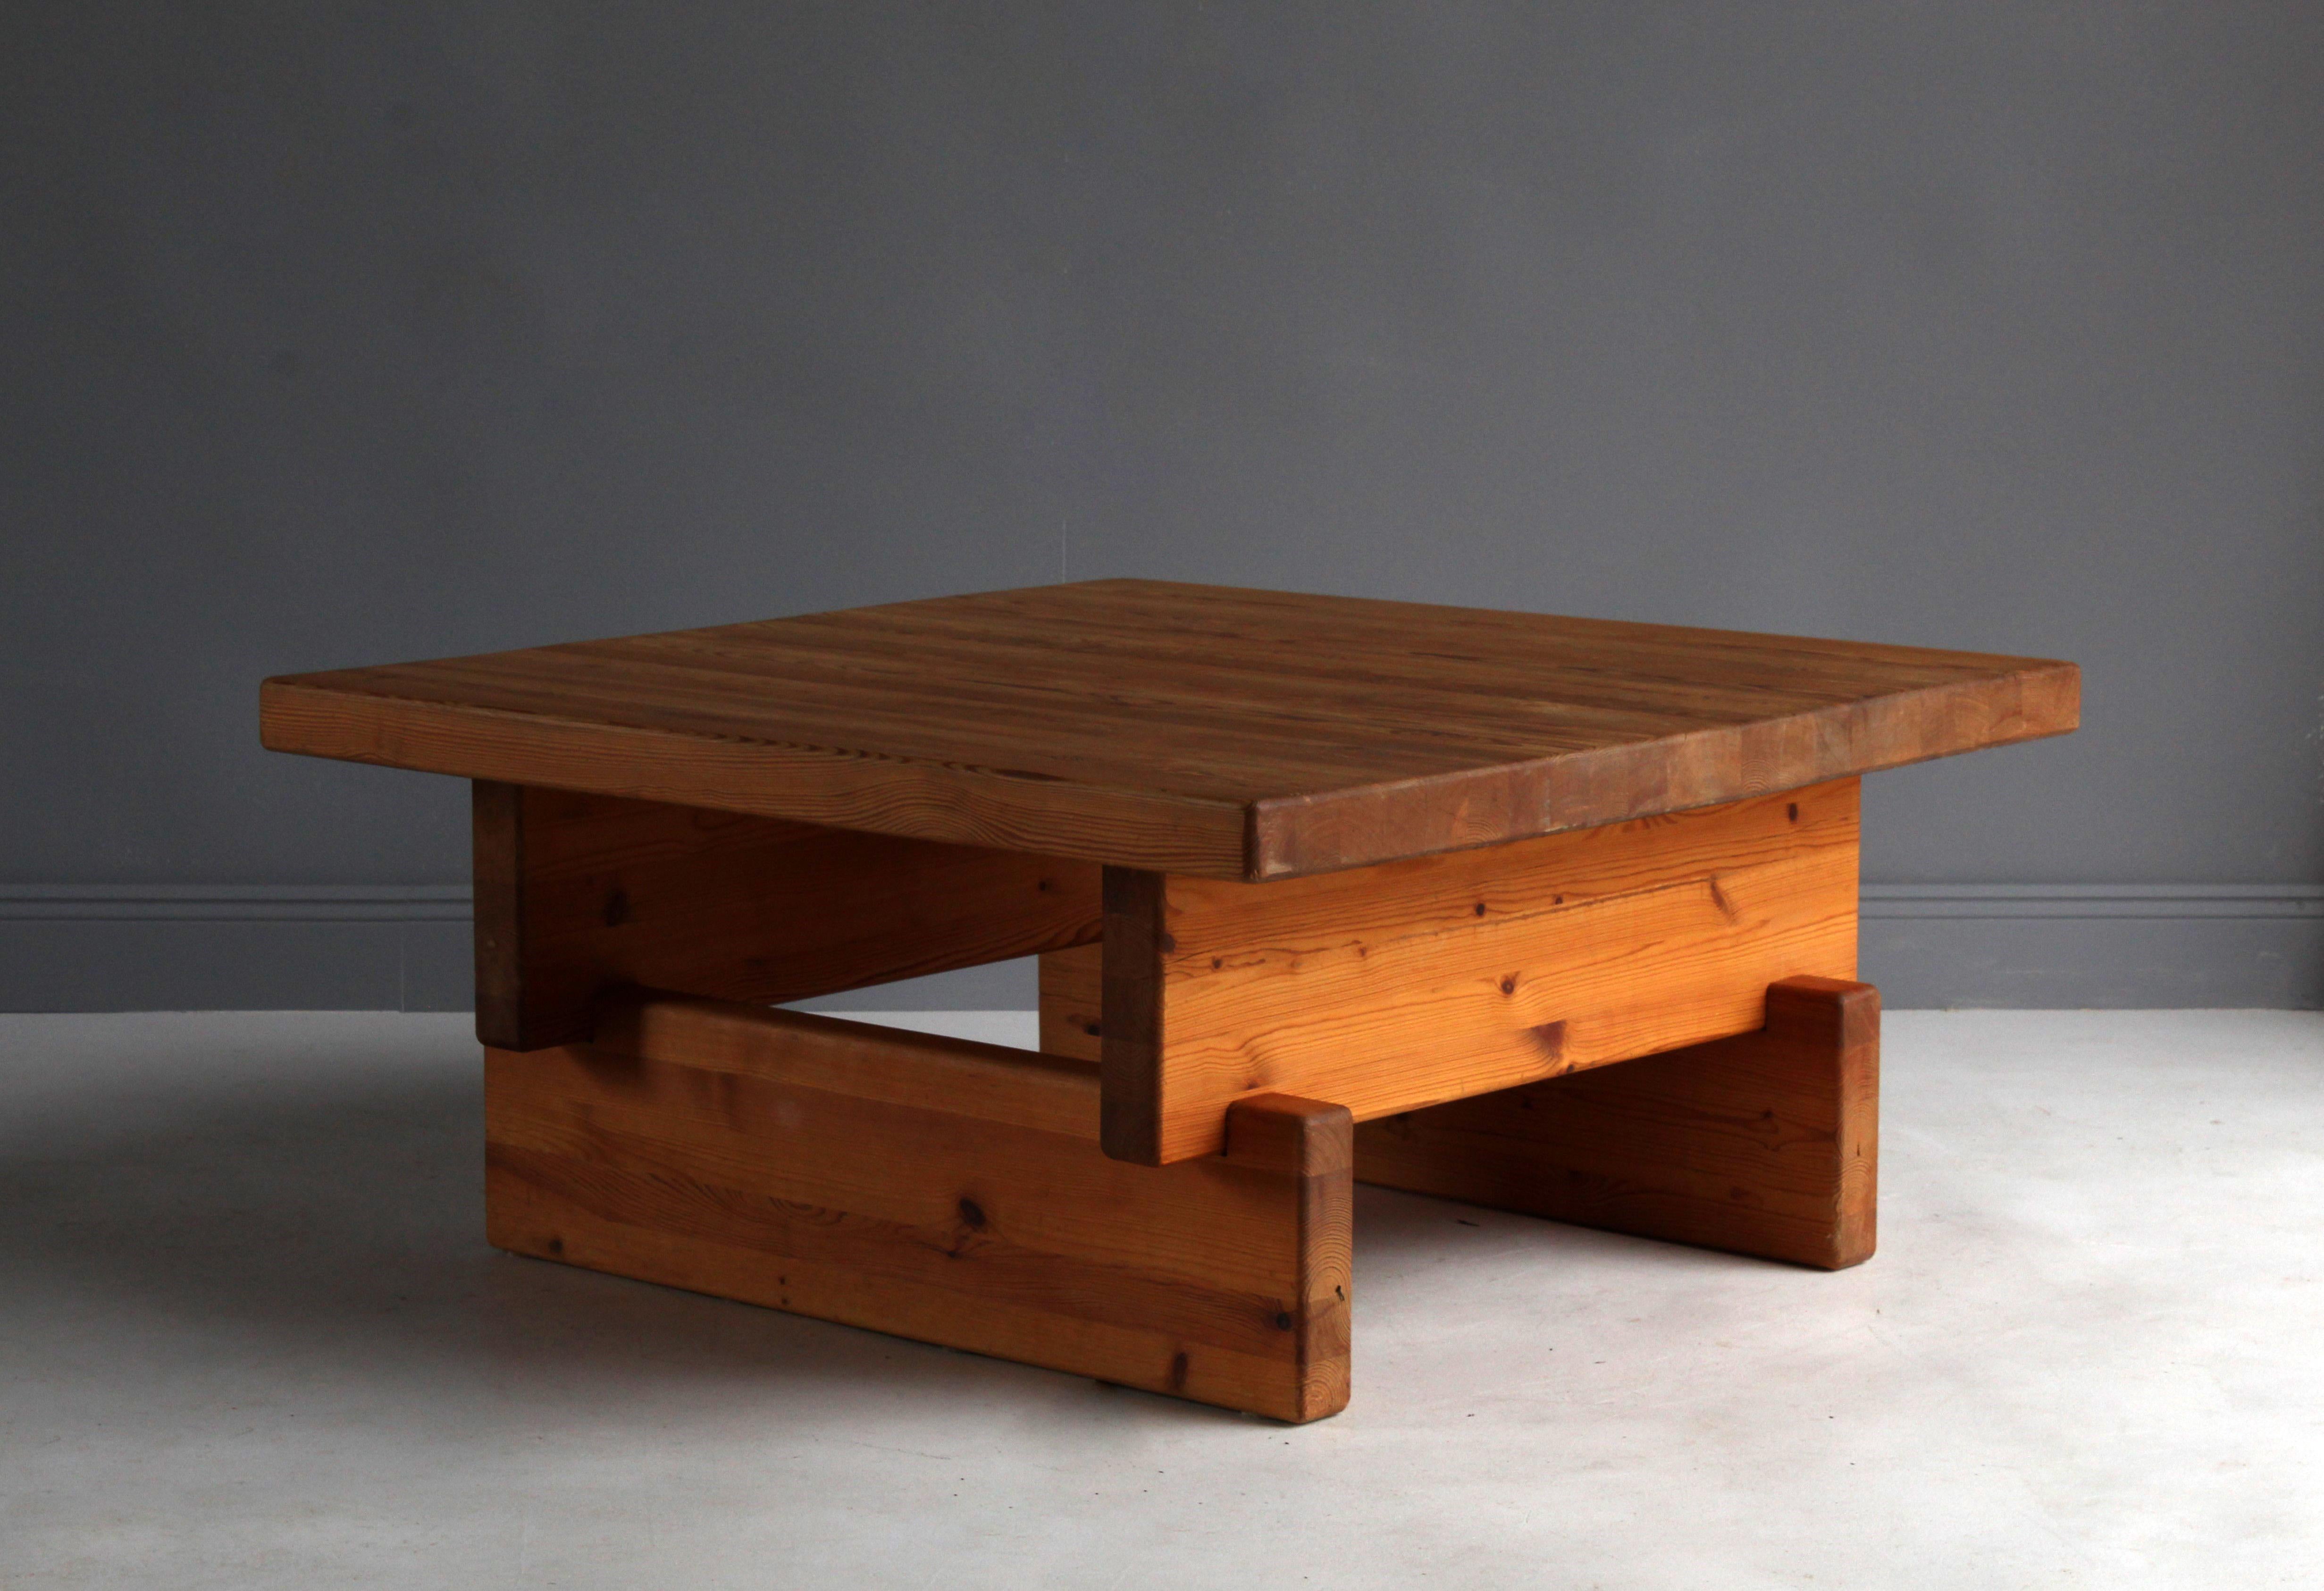 A modernist / Minimalist coffee table. Attributed to Roland Wilhelmsson. Possibly produced by Karl Andersson & Söner. Construction in sold pine blocks stacked upon each other. 

Other designers working in similar fashion and materials include Axel